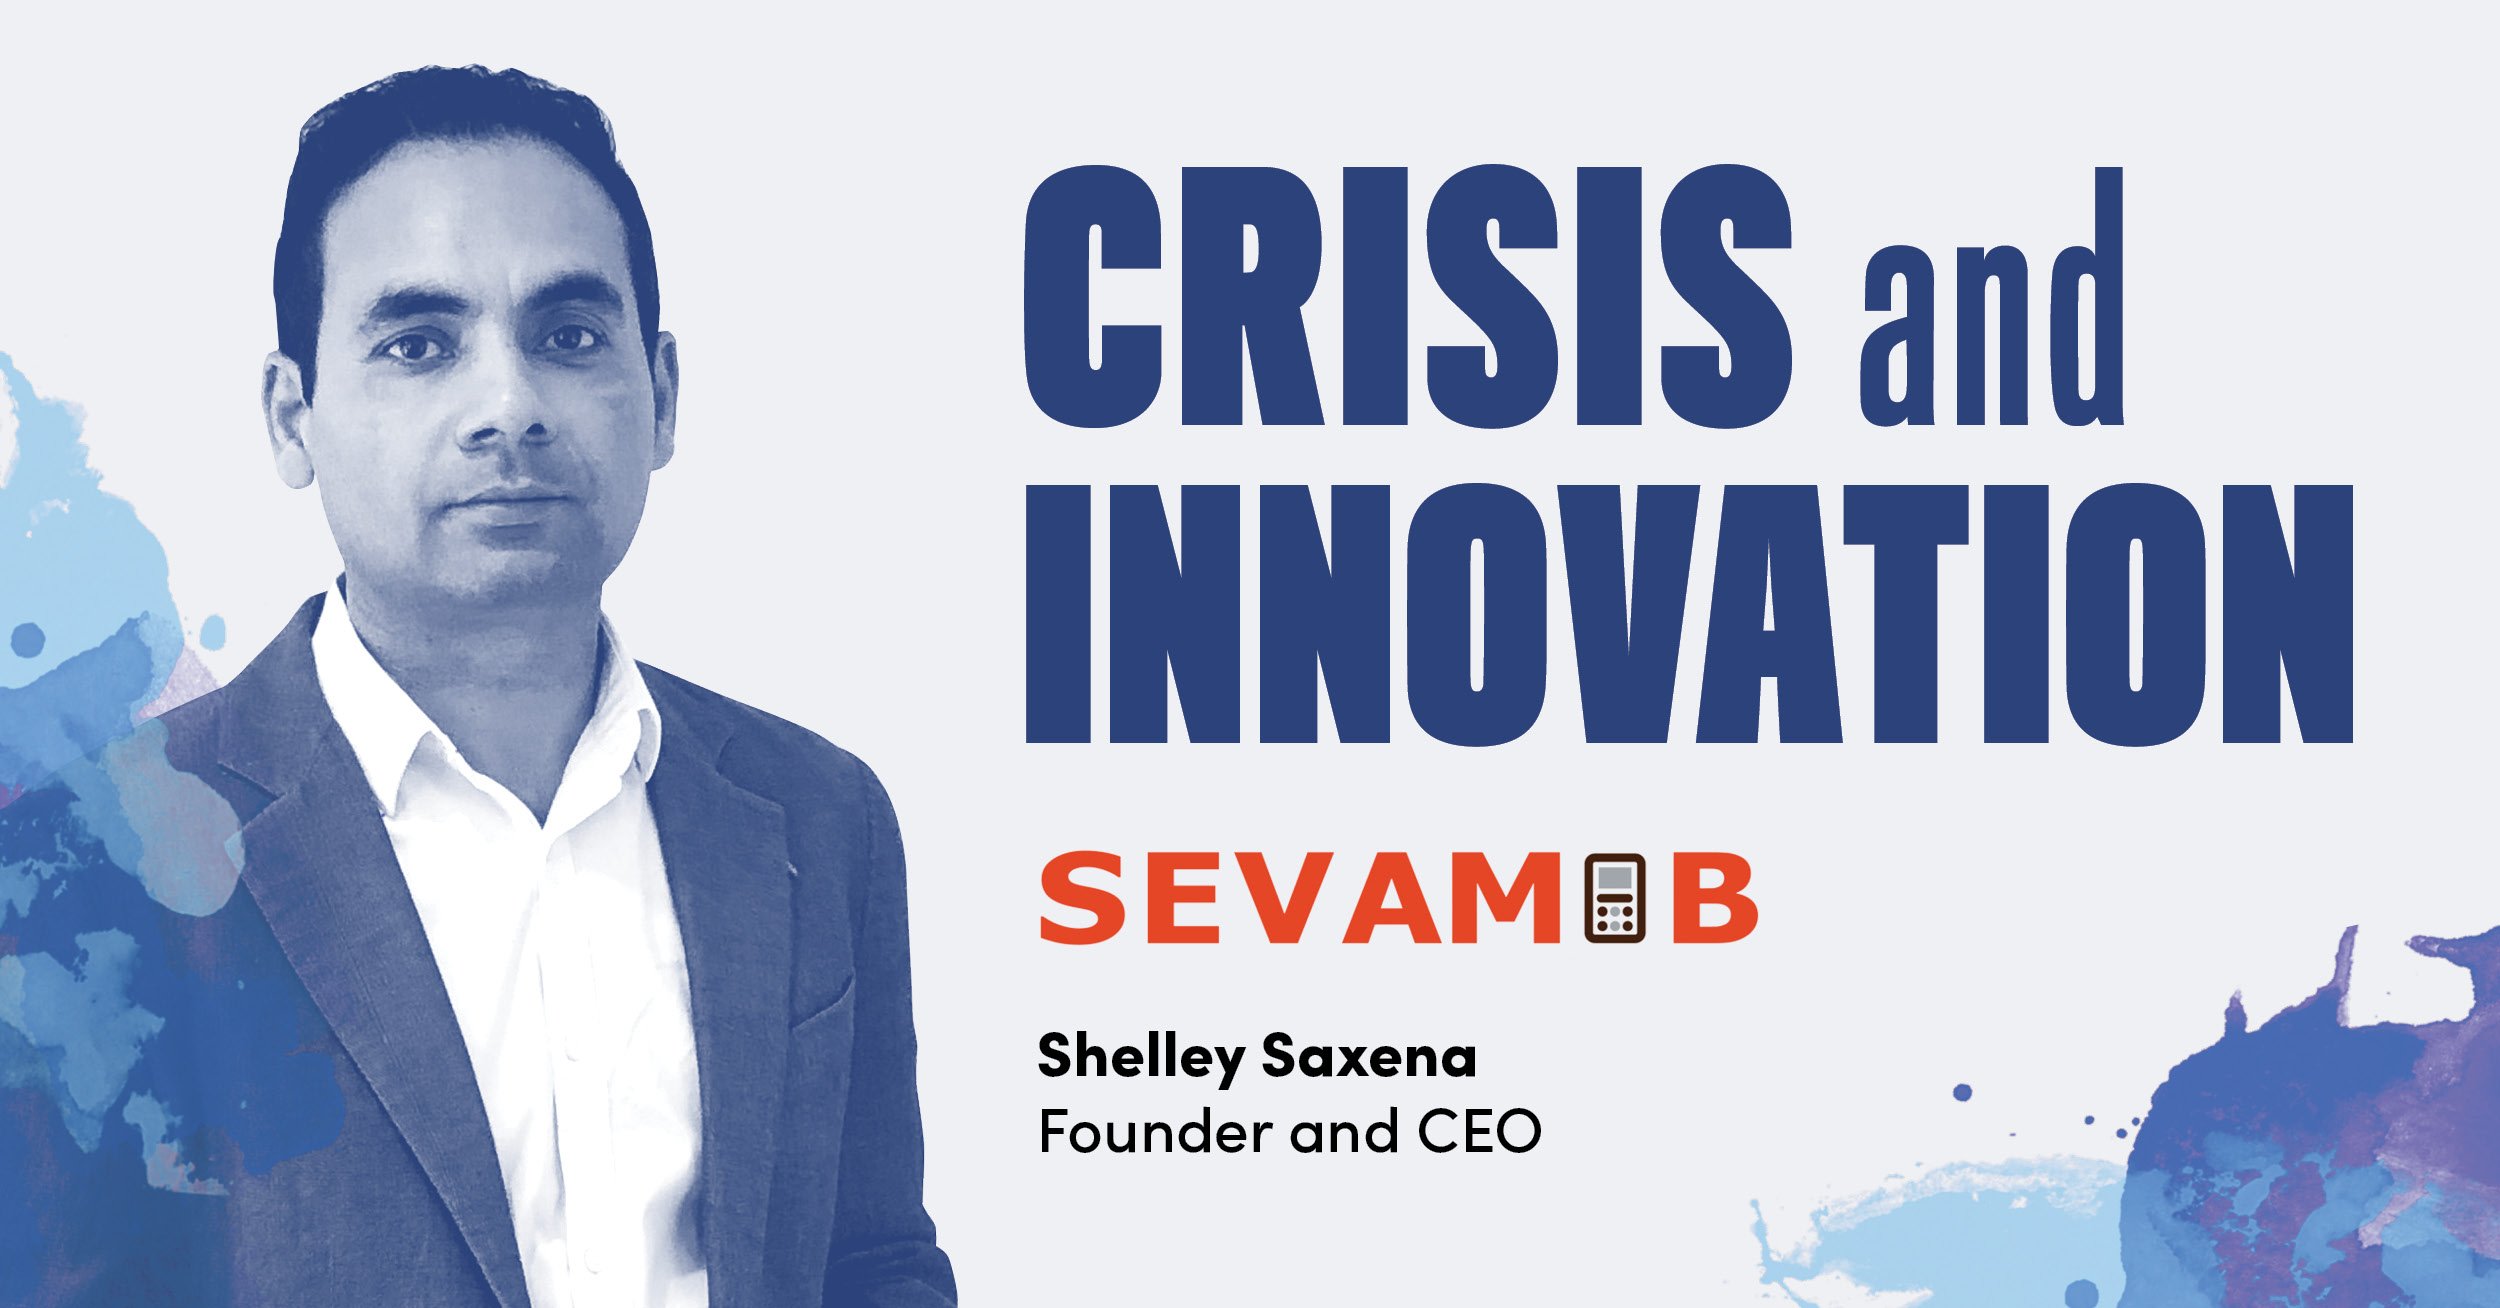 crisis and innovation: sevamob is opening pop-up health clinics in rural india